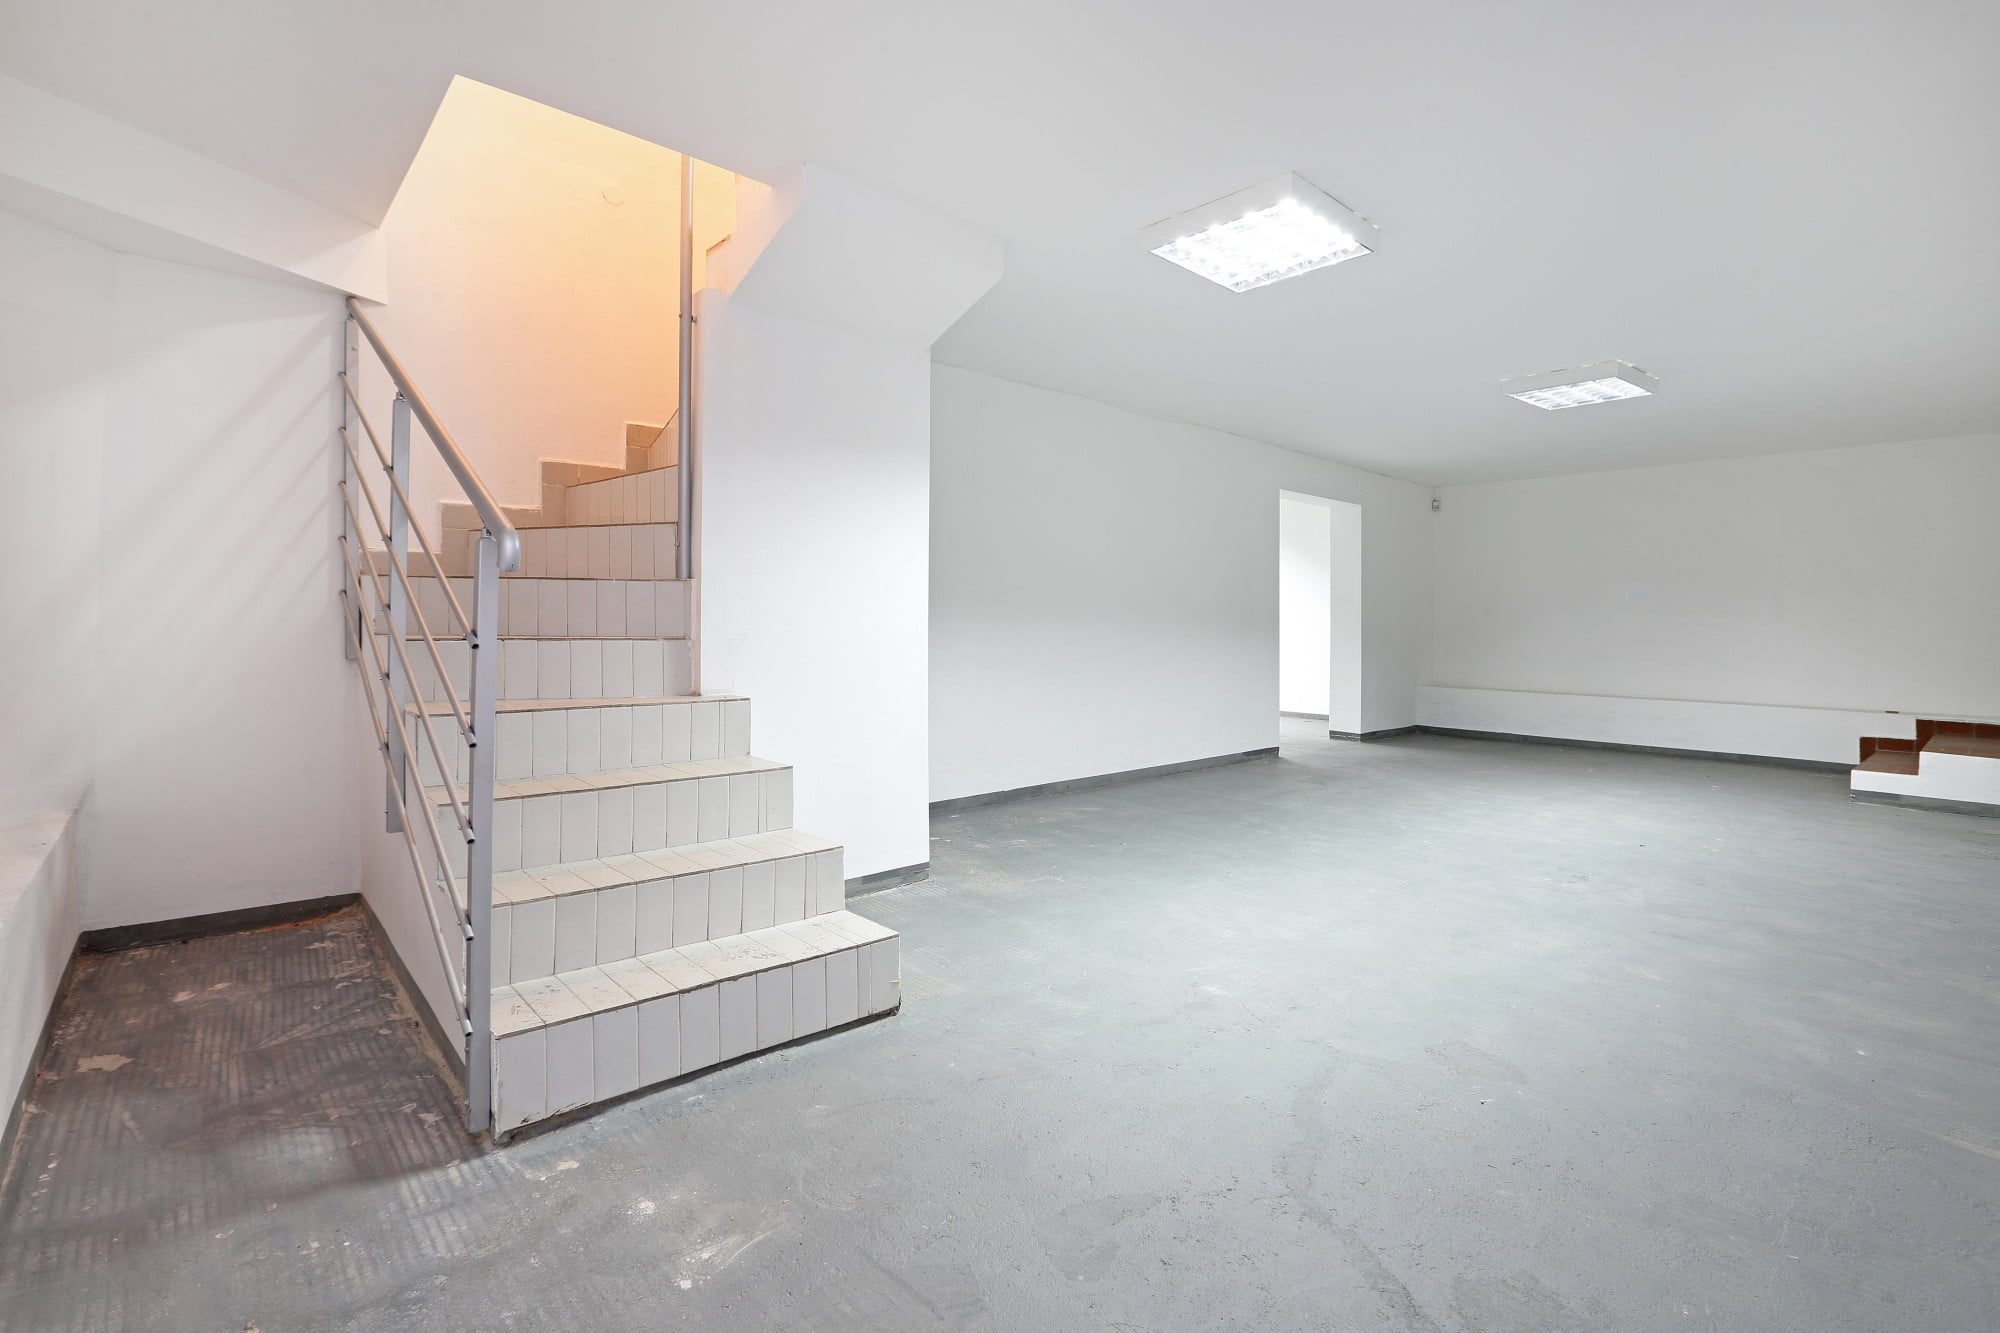 The basement can be a vulnerable area, but it can become a much-needed room with some thoughtful remodeling. Consider these basement remodel ideas.